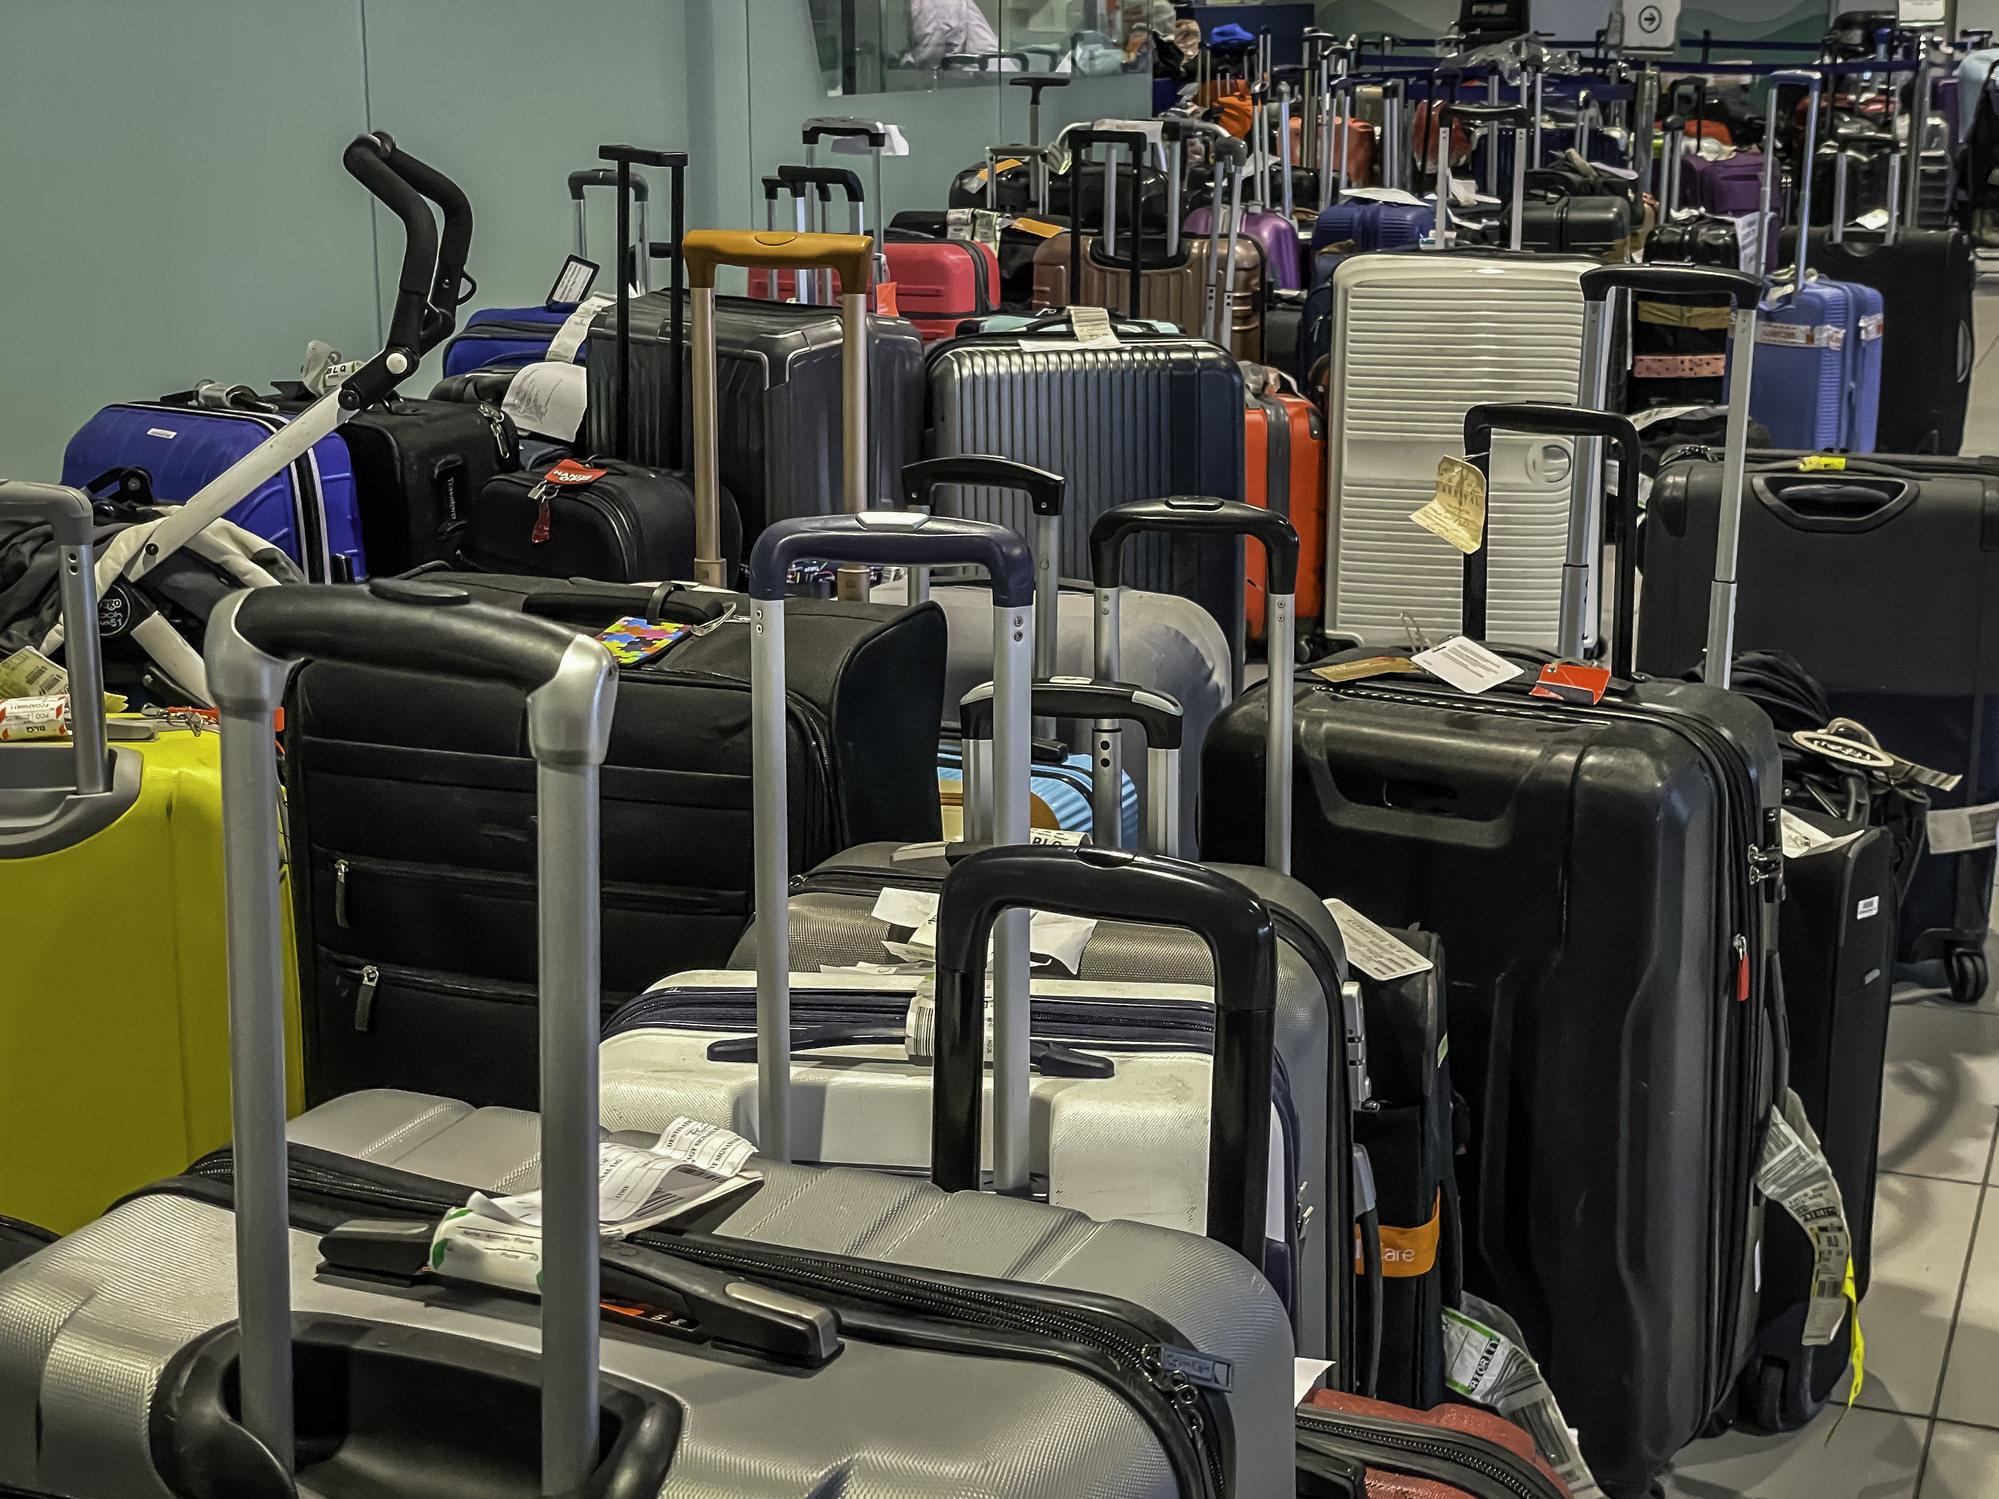 Luggage in an airport